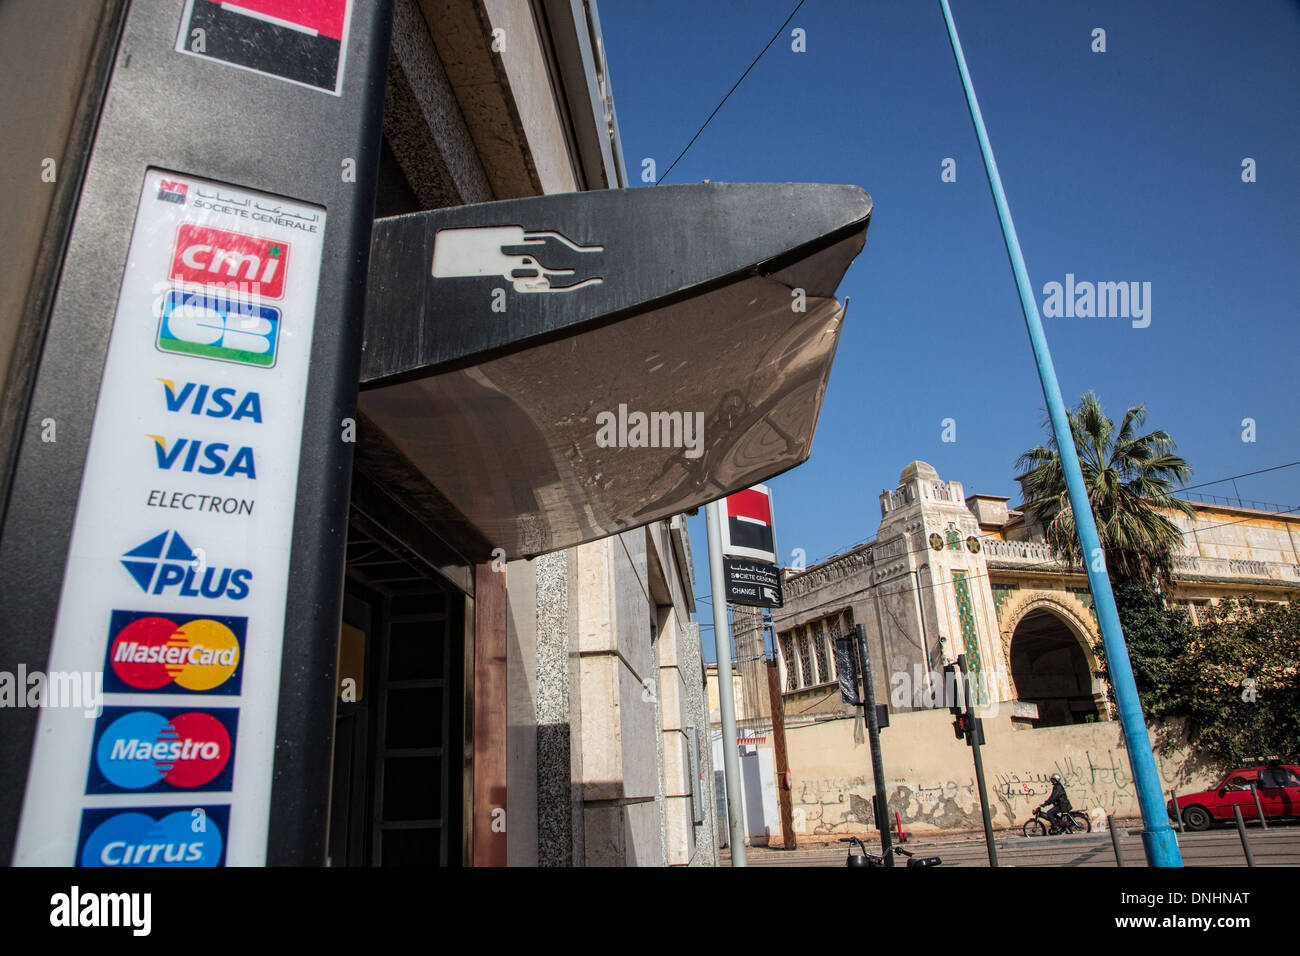 BRANCH OF THE SOCIETE GENERALE BANK IN THE NEIGHBORHOOD OF THE FORMER SLAUGHTERHOUSES, CASABLANCA, MOROCCO, AFRICA Stock Photo